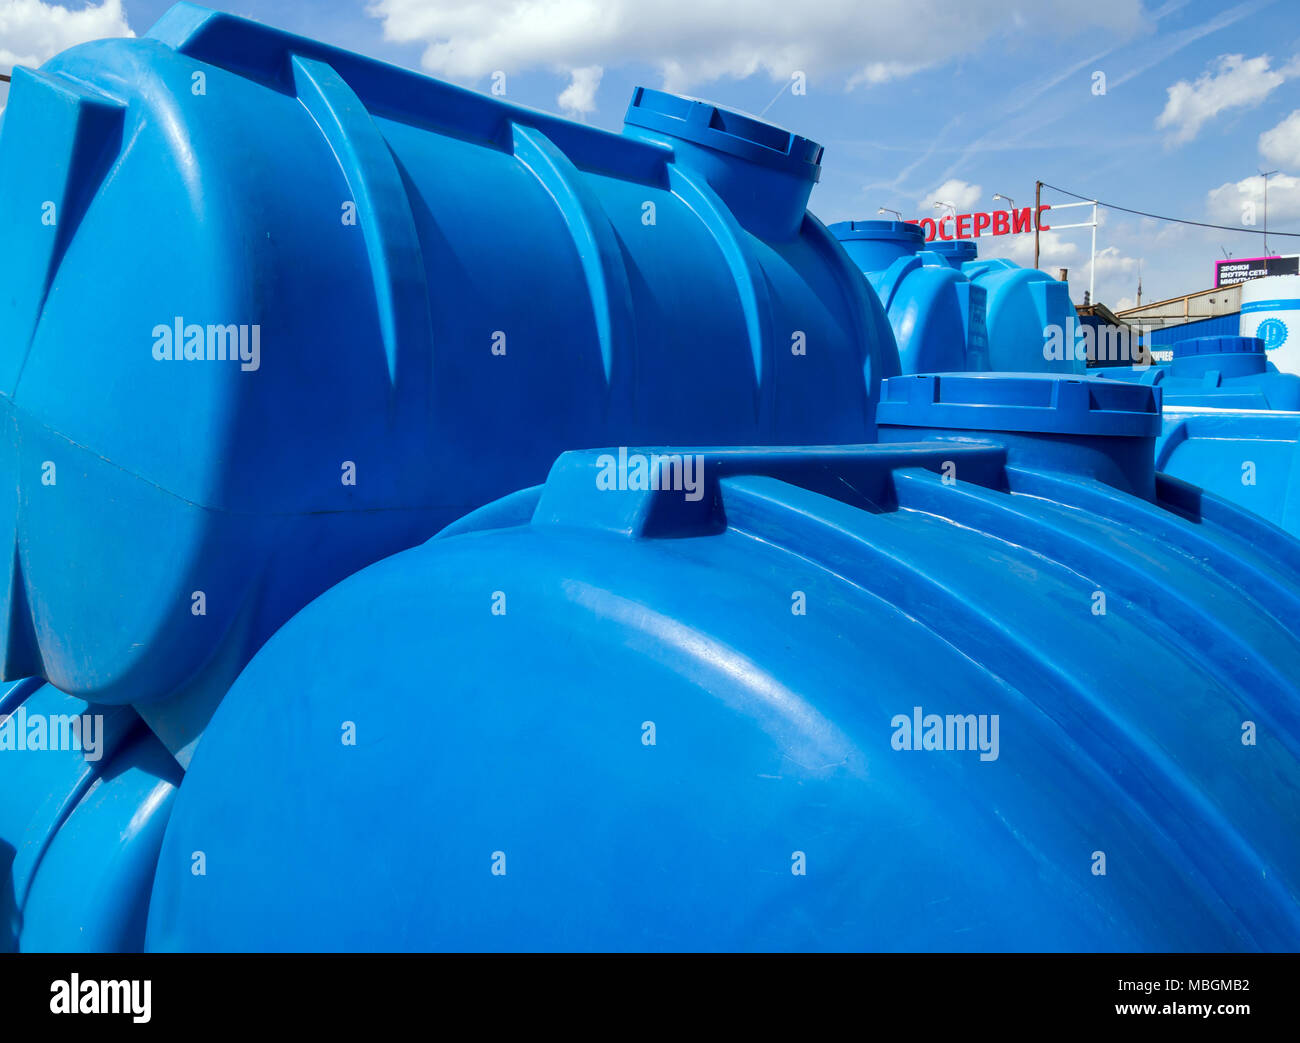 Large blue plastic containers for water and other liquids Stock Photo